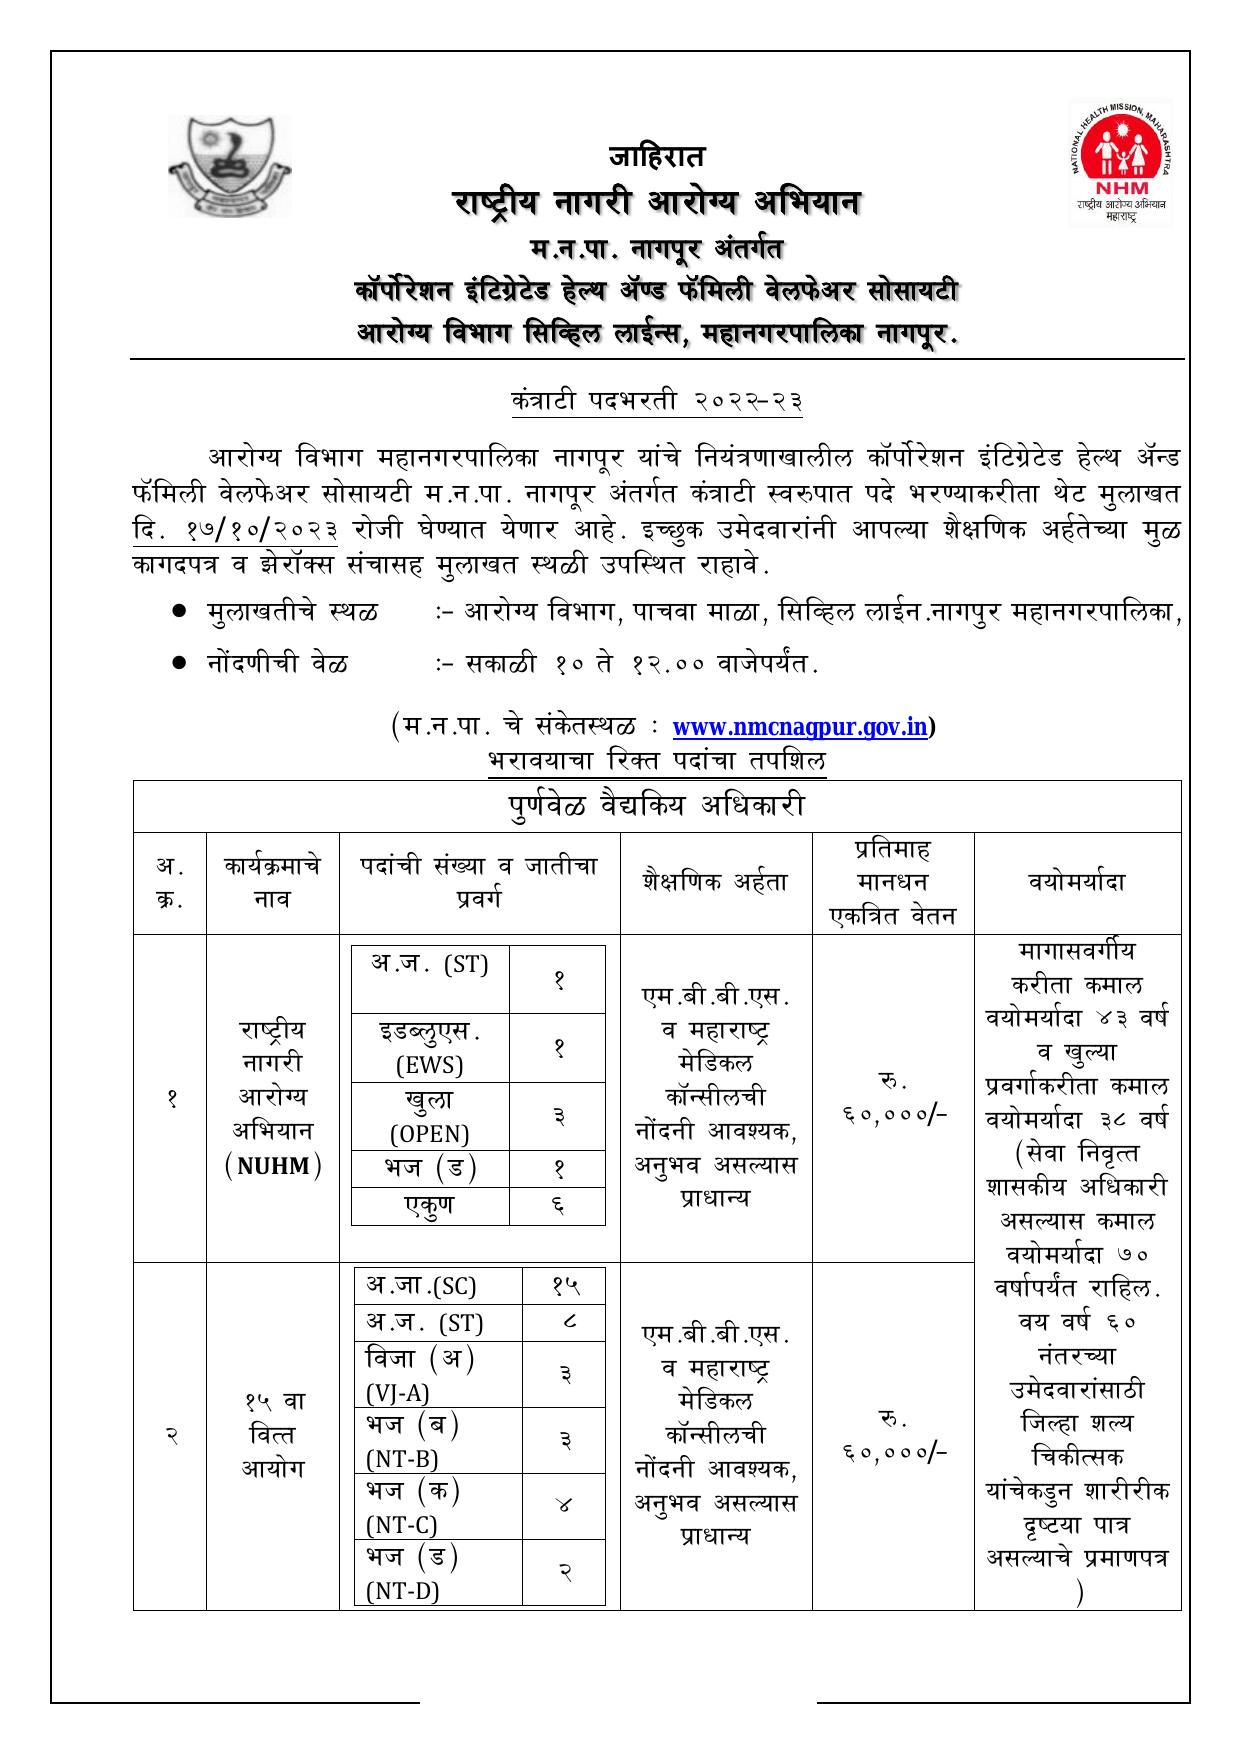 Nagpur Municipal Corporation (NMC) Full Time Medical Officer Recruitment 2023 - Page 3